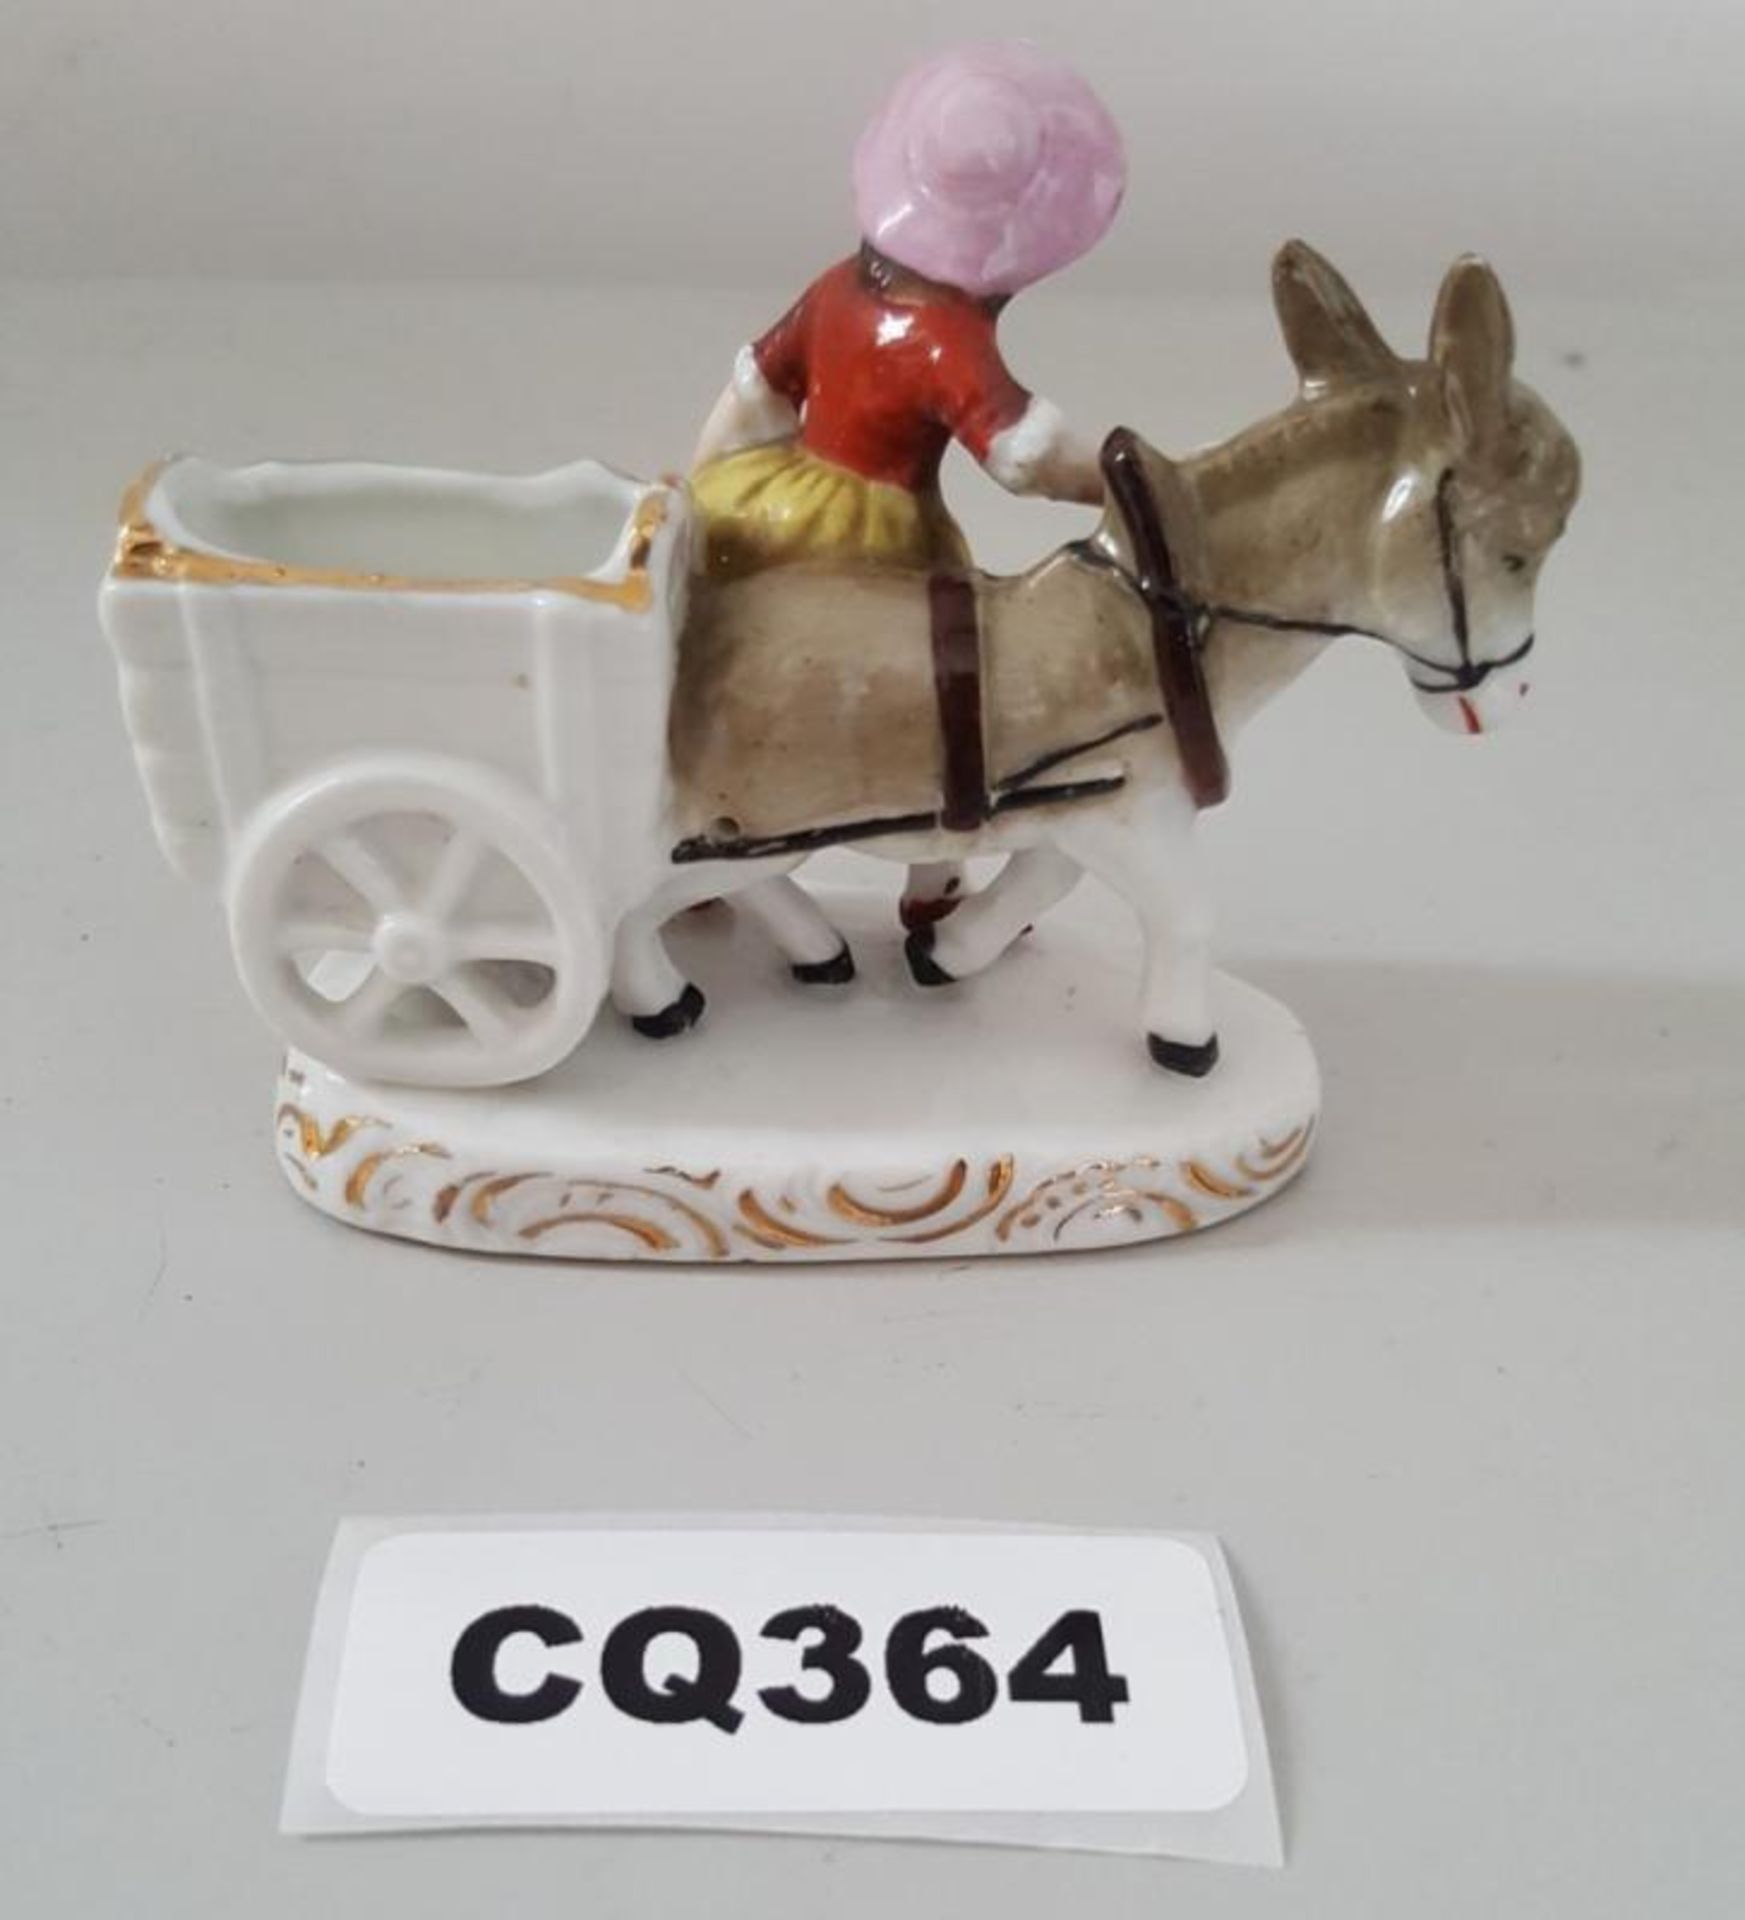 1 x Small Porcelain Figurine Of Women With Horse And Cart - Ref CQ364 E - Dimensions: H7/L9 cm - CL3 - Image 2 of 4